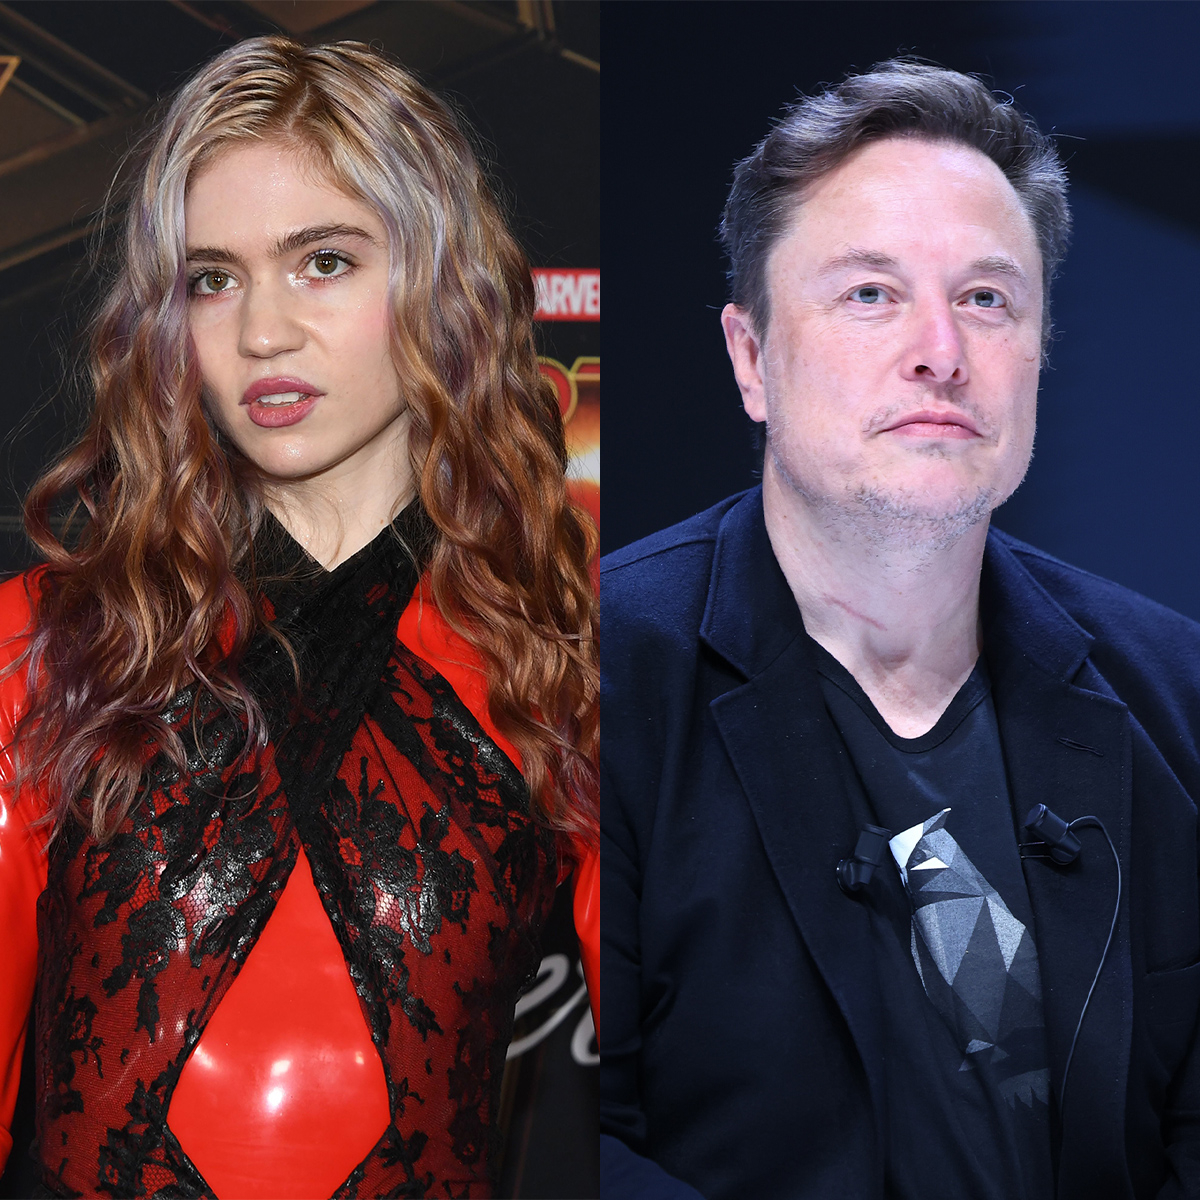 Elon Musk’s Ex Grimes Shares Support for His Daughter Vivian